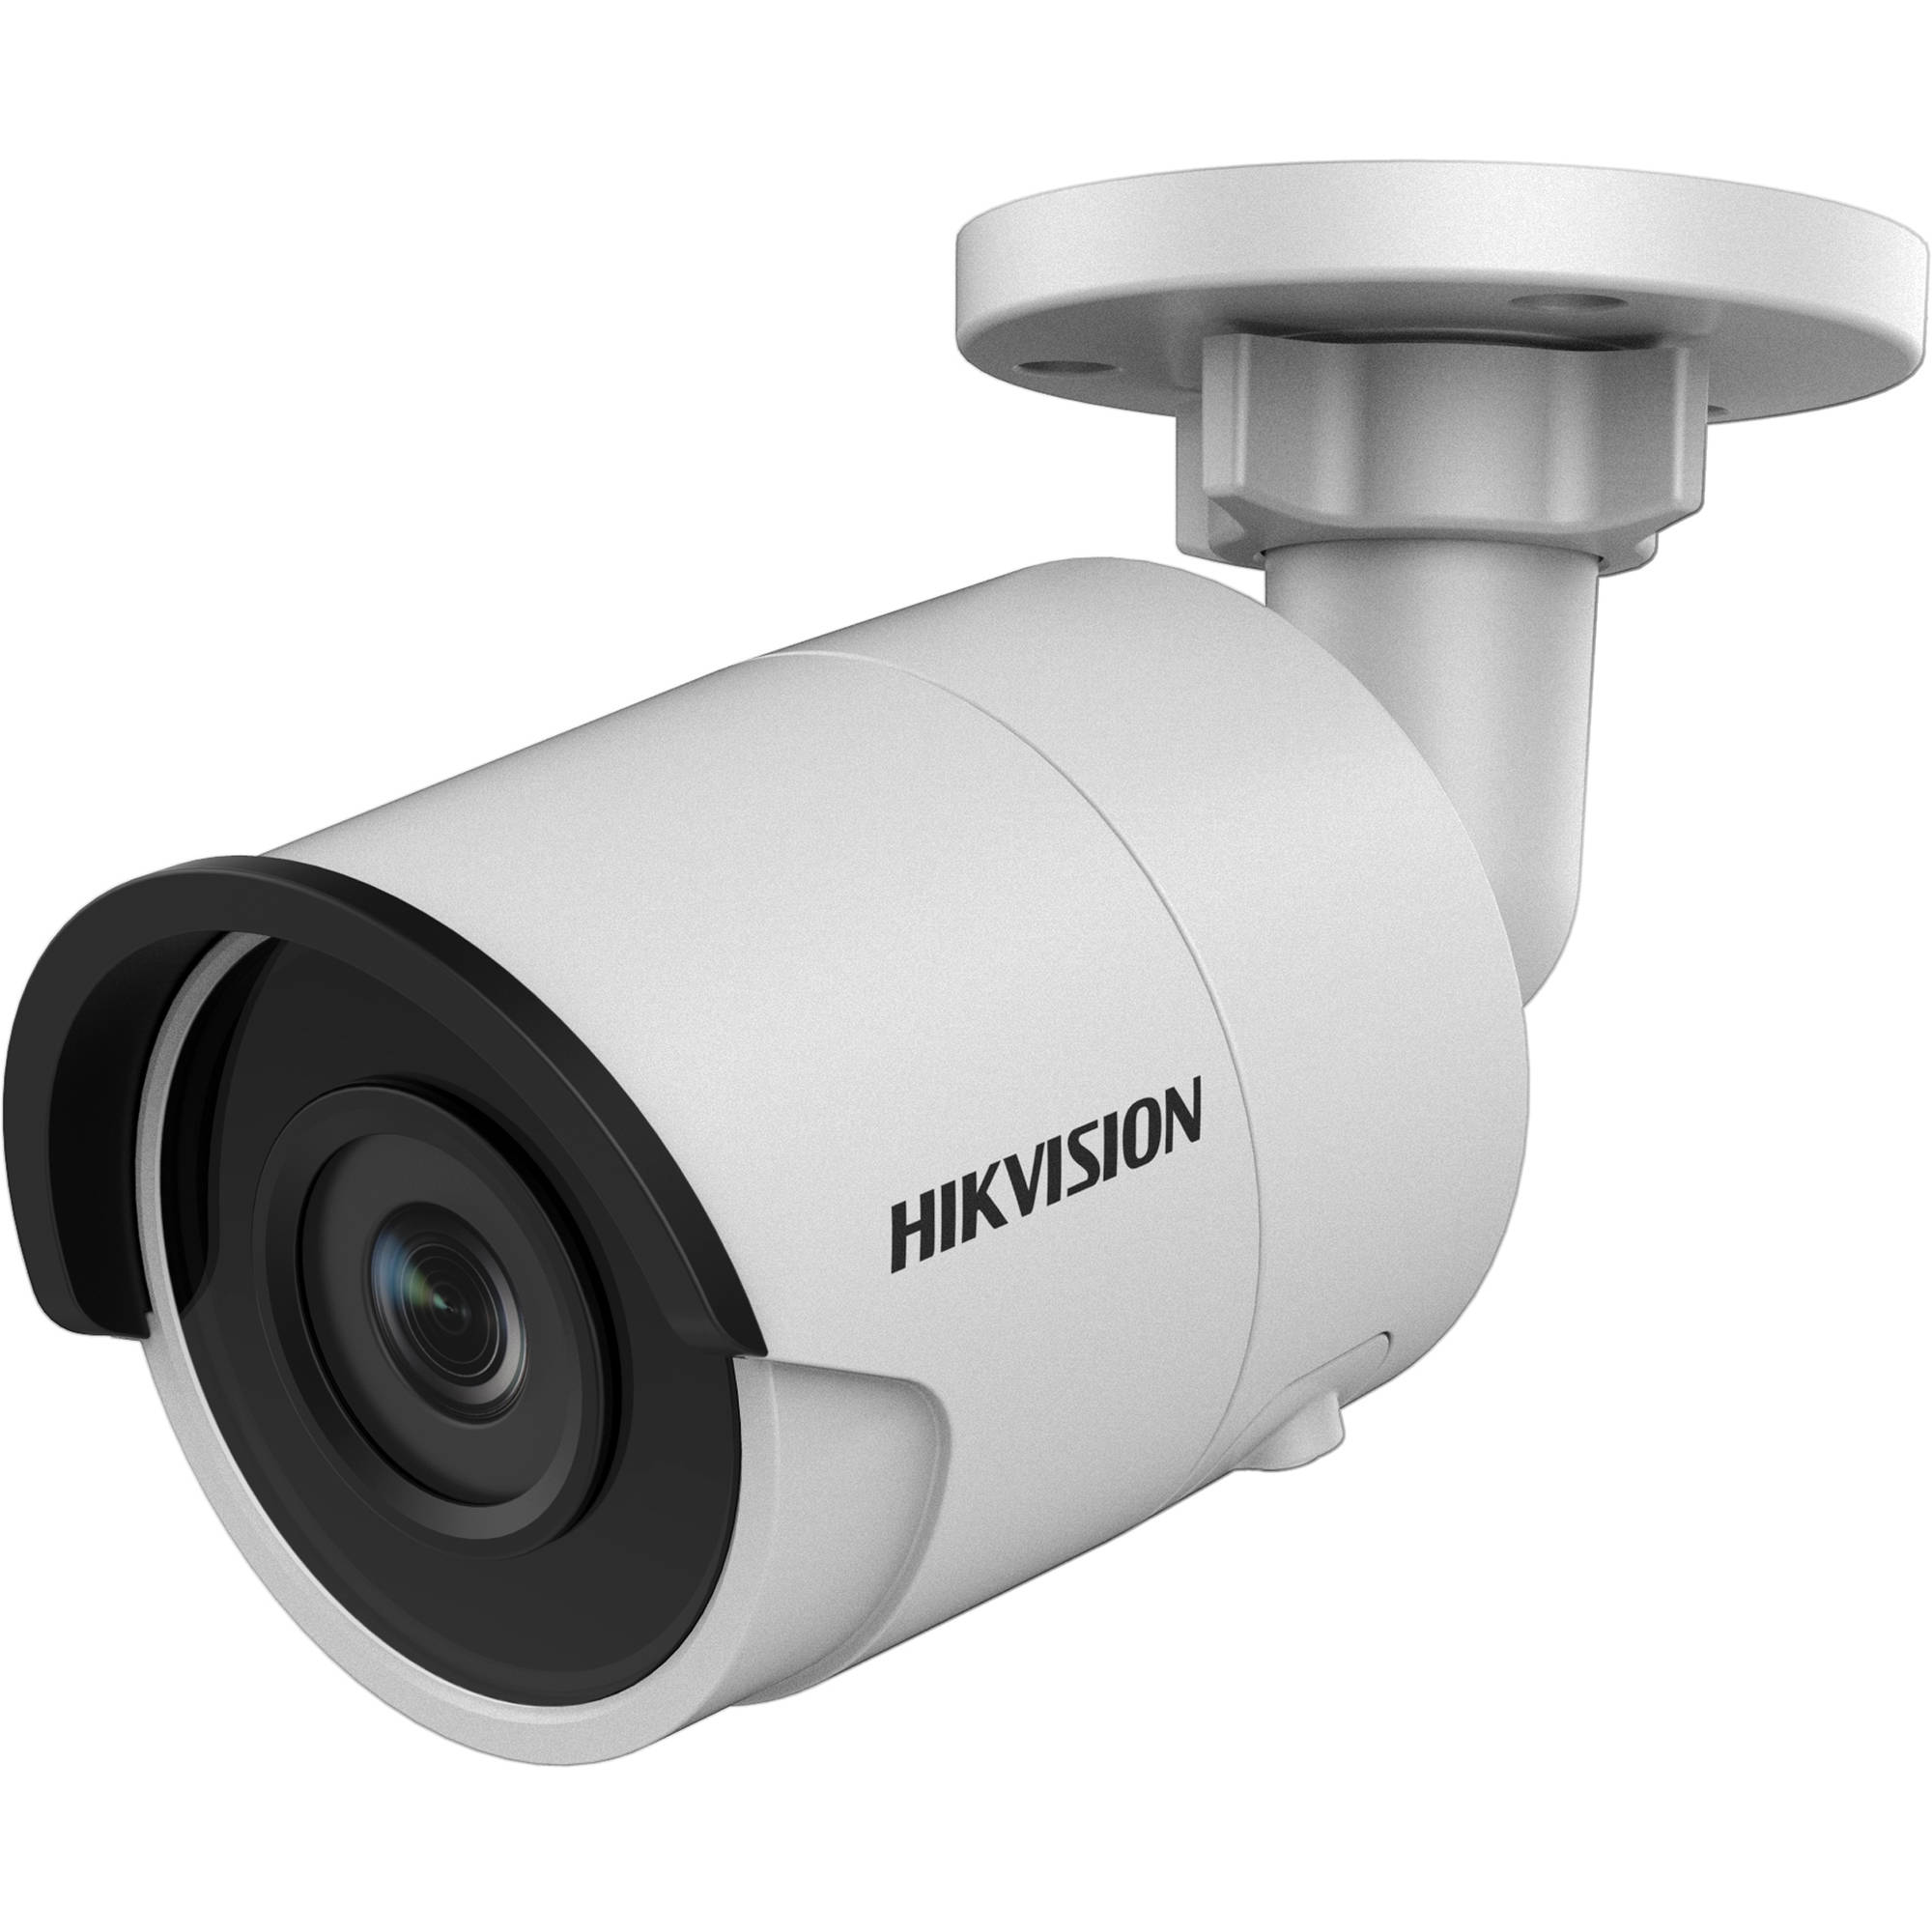 How to Buy a Hikvision Camera